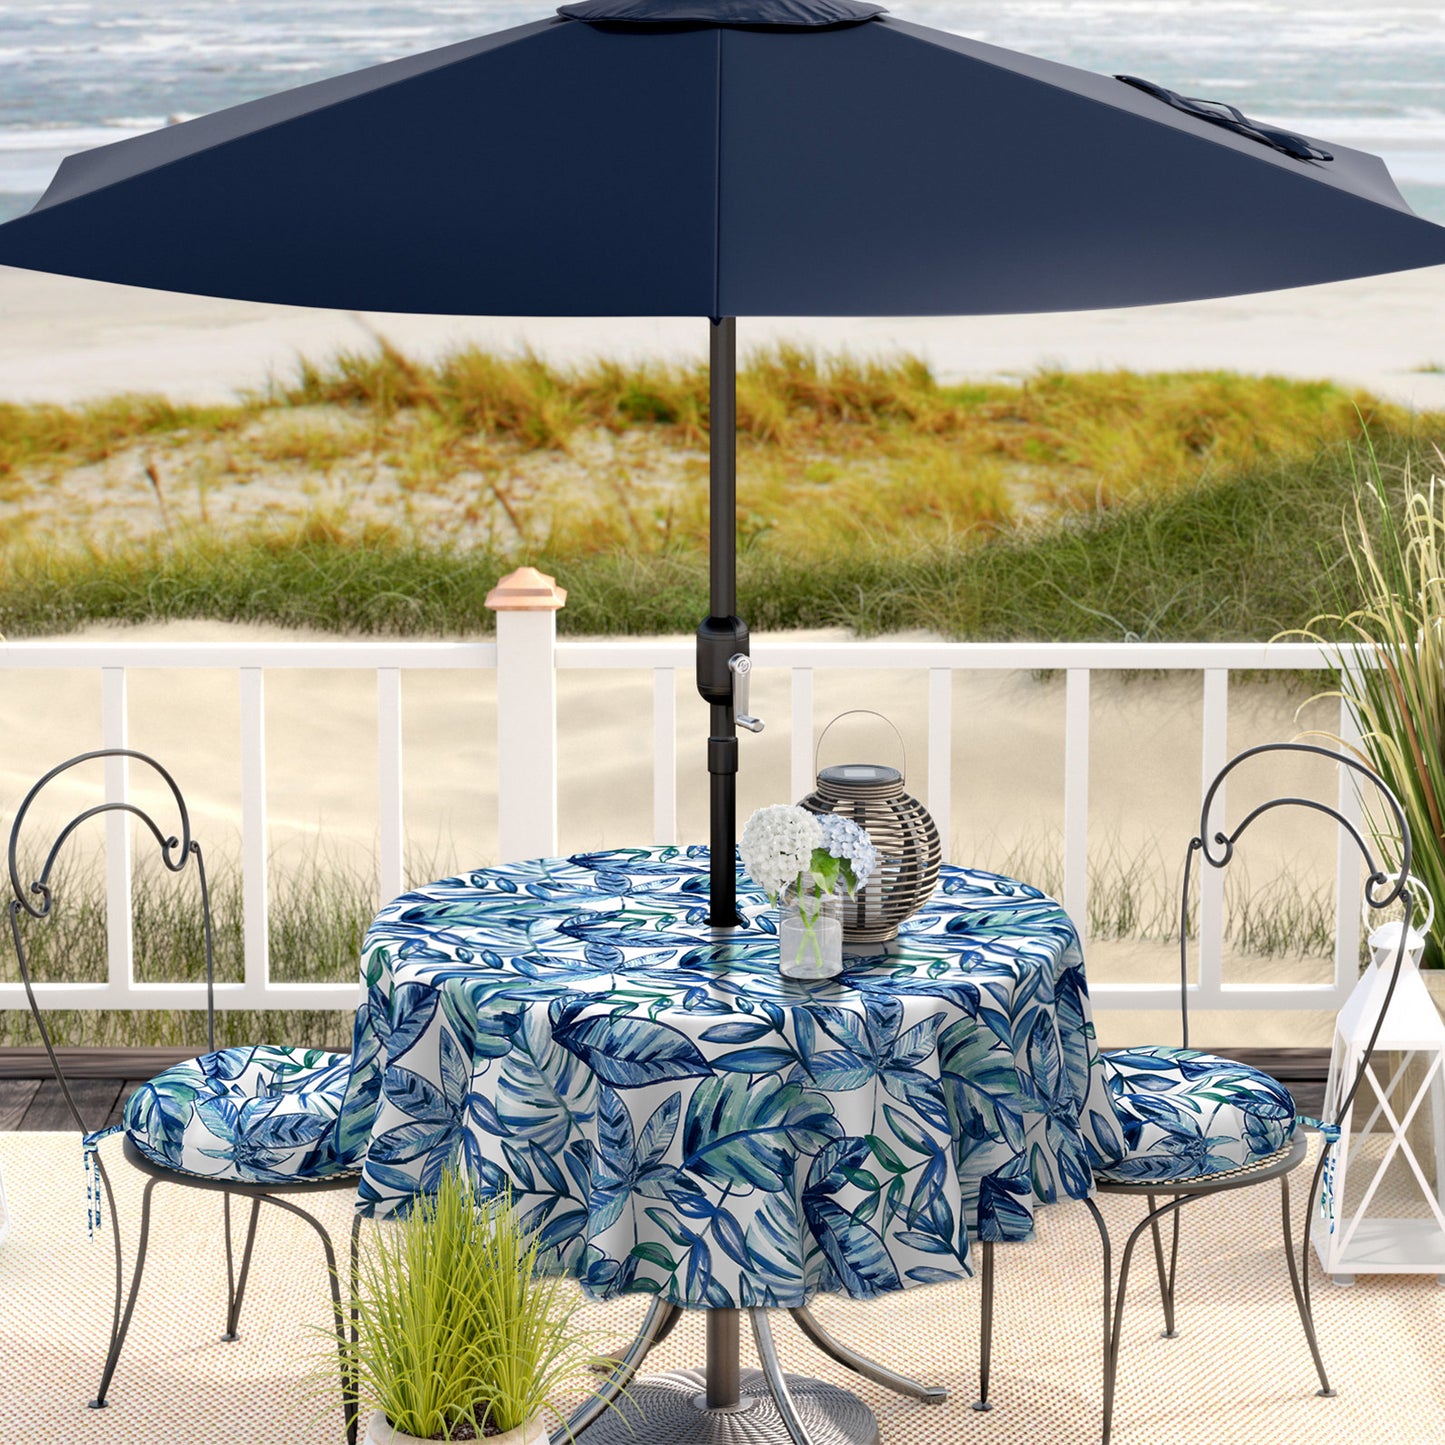 Melody Elephant Outdoor/Indoor Round Tablecloth with Umbrella Hole Zipper, Decorative Circular Table Cover for Home Garden, 60 Inch, Leaves Ink Blue